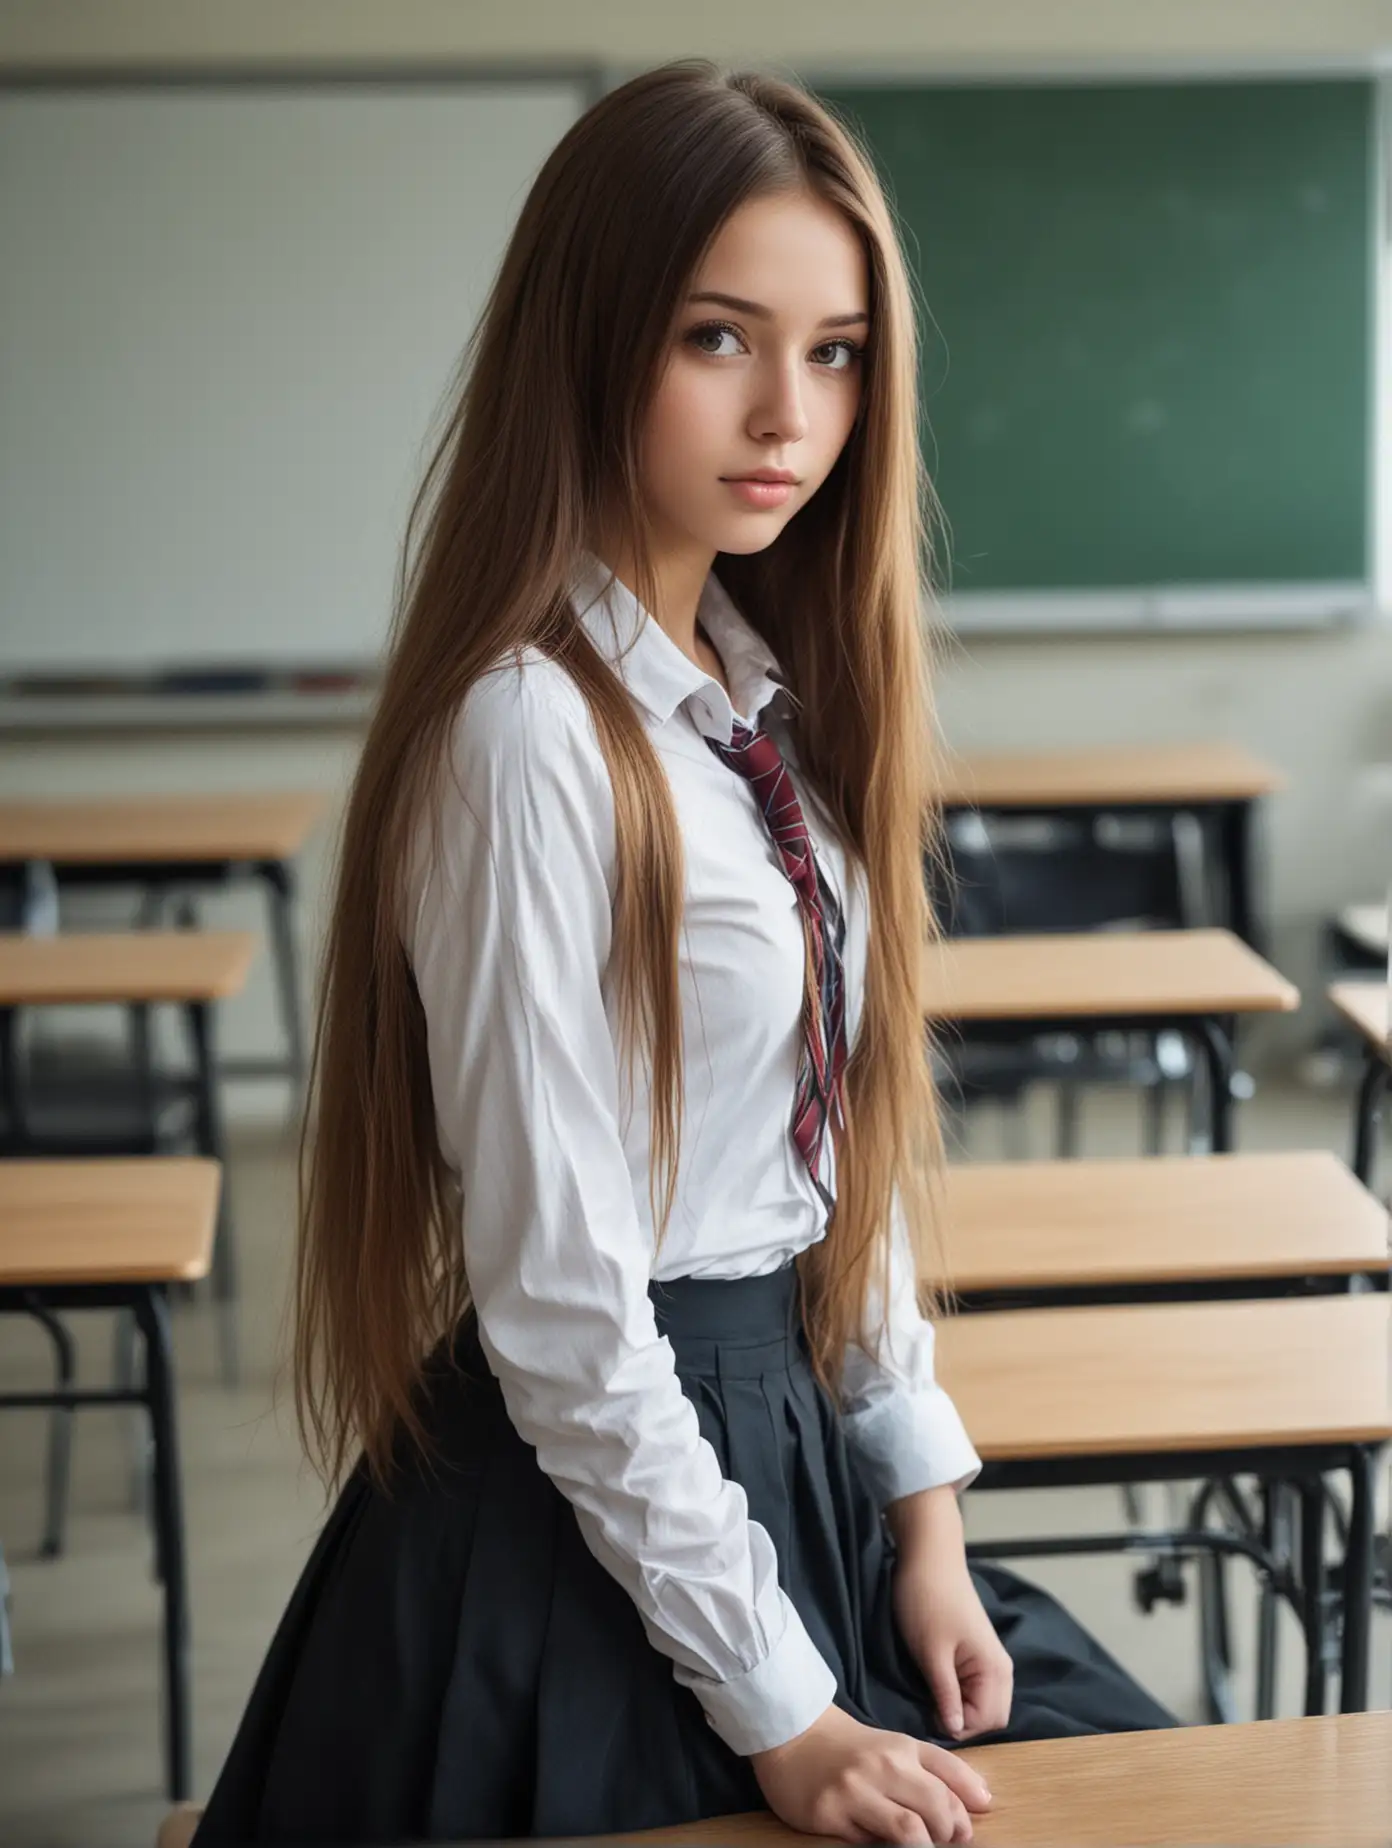 Lonely-Student-with-WaistLength-Hair-in-Classroom